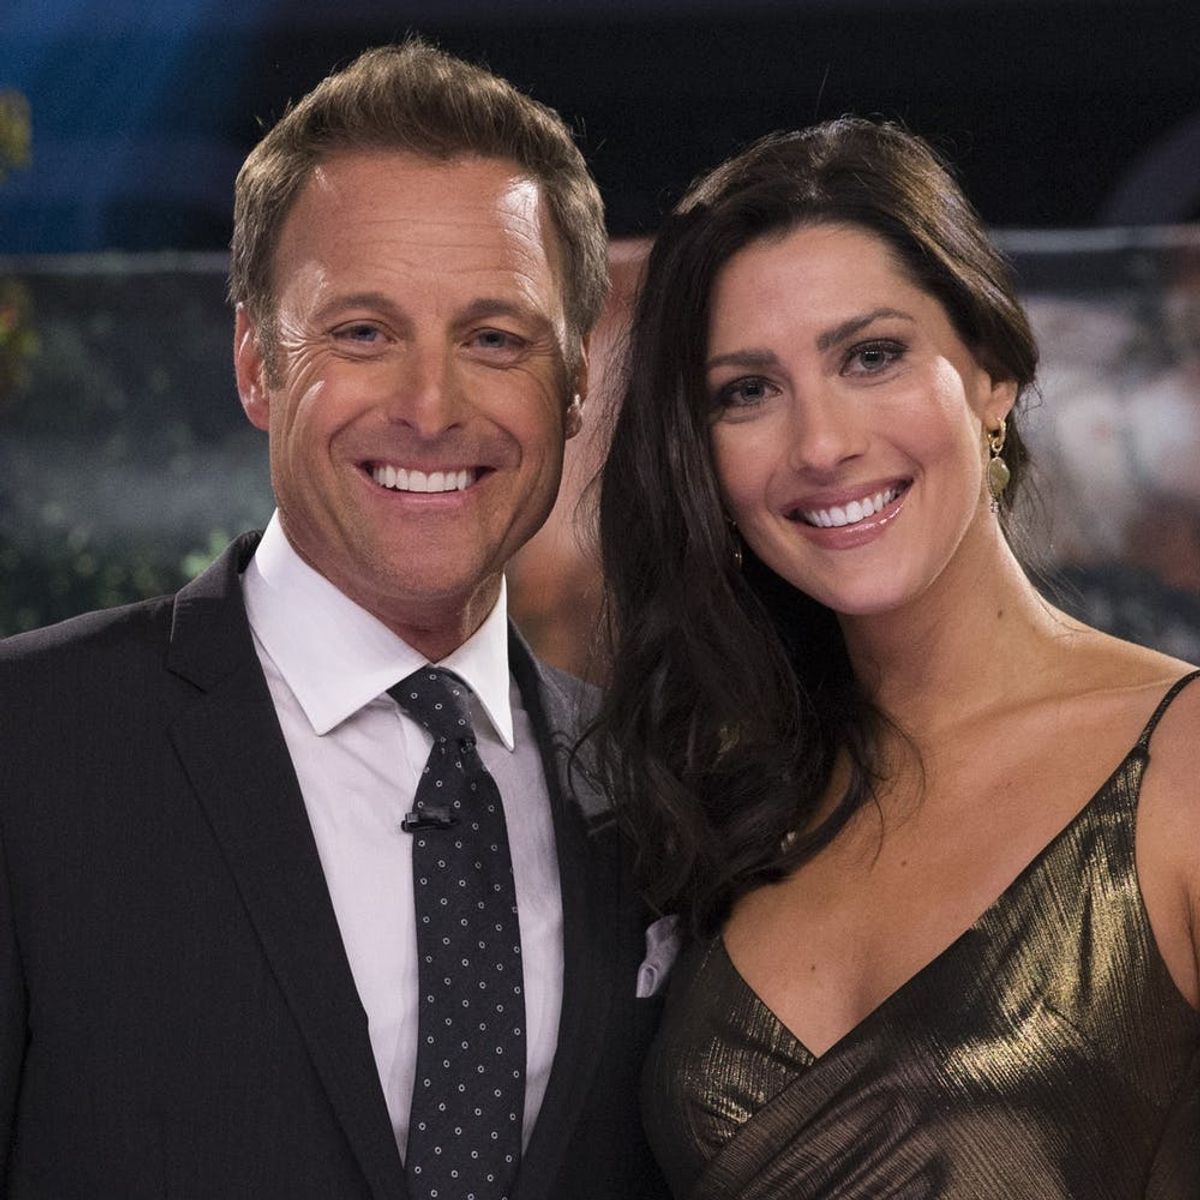 Chris Harrison Says Becca Kufrin’s ‘Bachelorette’ Season Will Have the ‘Most Ridiculous Fight’ Ever